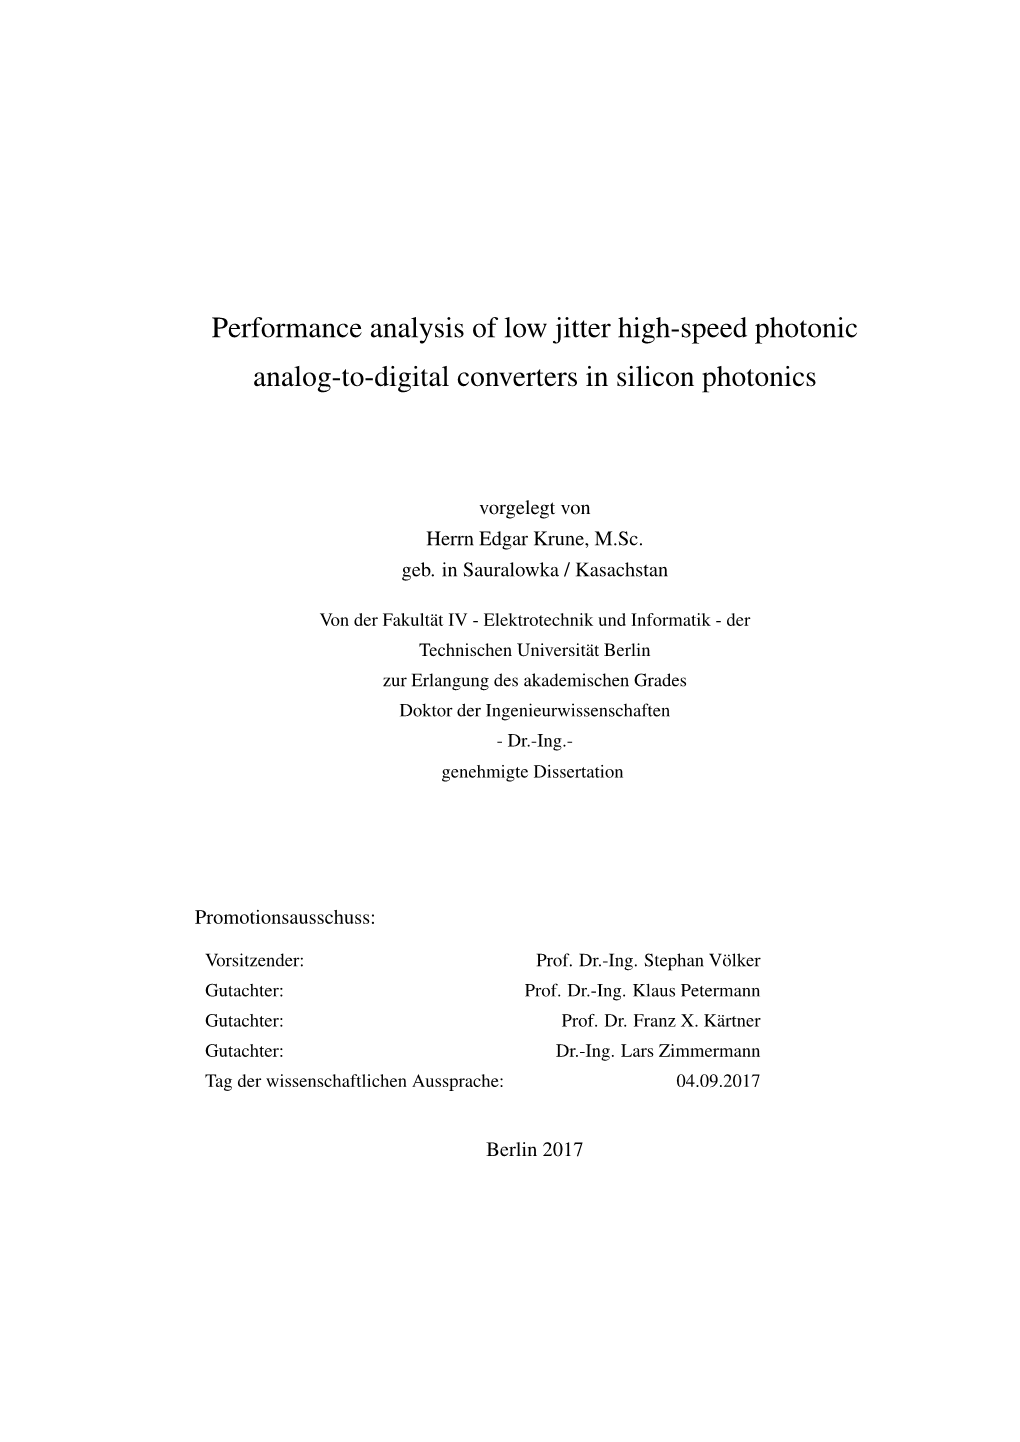 Performance Analysis of Low Jitter High-Speed Photonic Analog-To-Digital Converters in Silicon Photonics